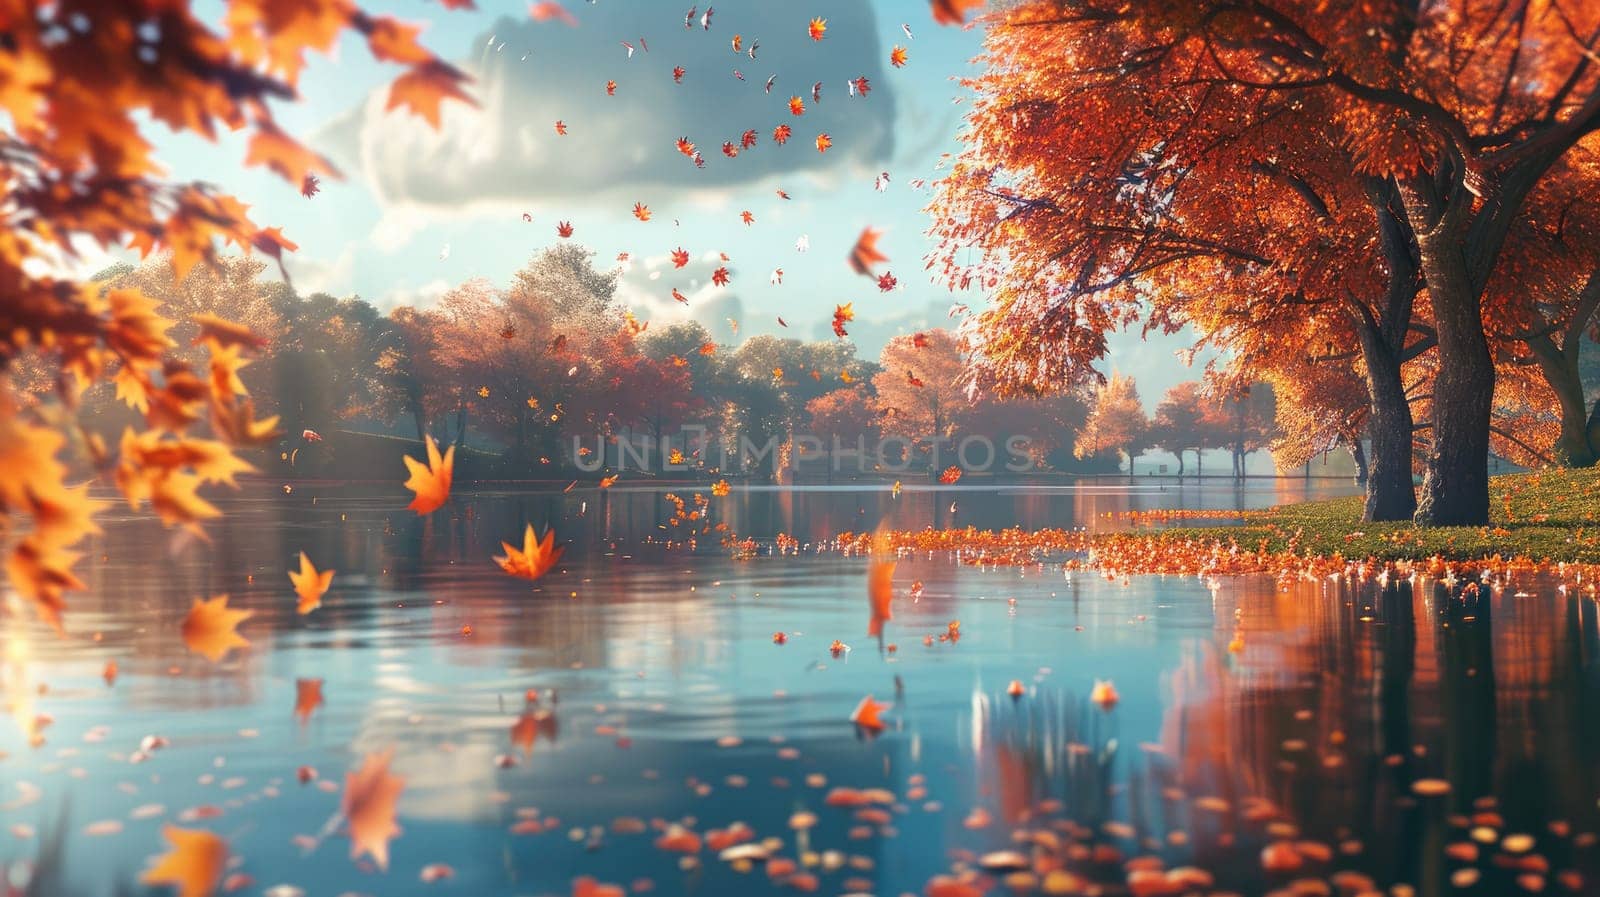 Tranquil Autumn Scene with Falling Leaves in a Peaceful Park Setting..